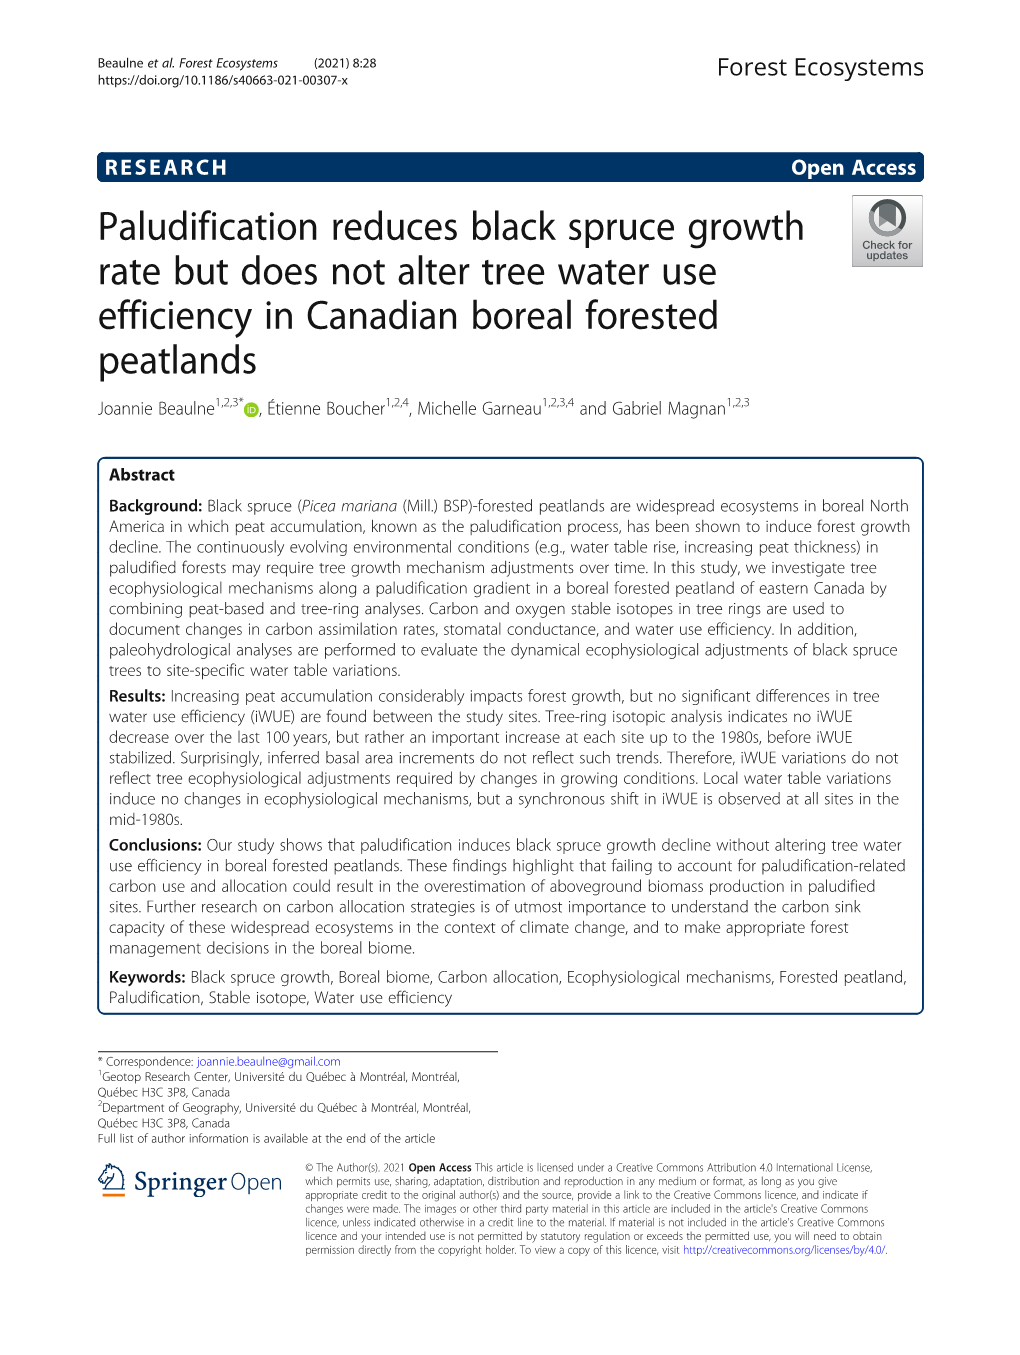 Paludification Reduces Black Spruce Growth Rate but Does Not Alter Tree